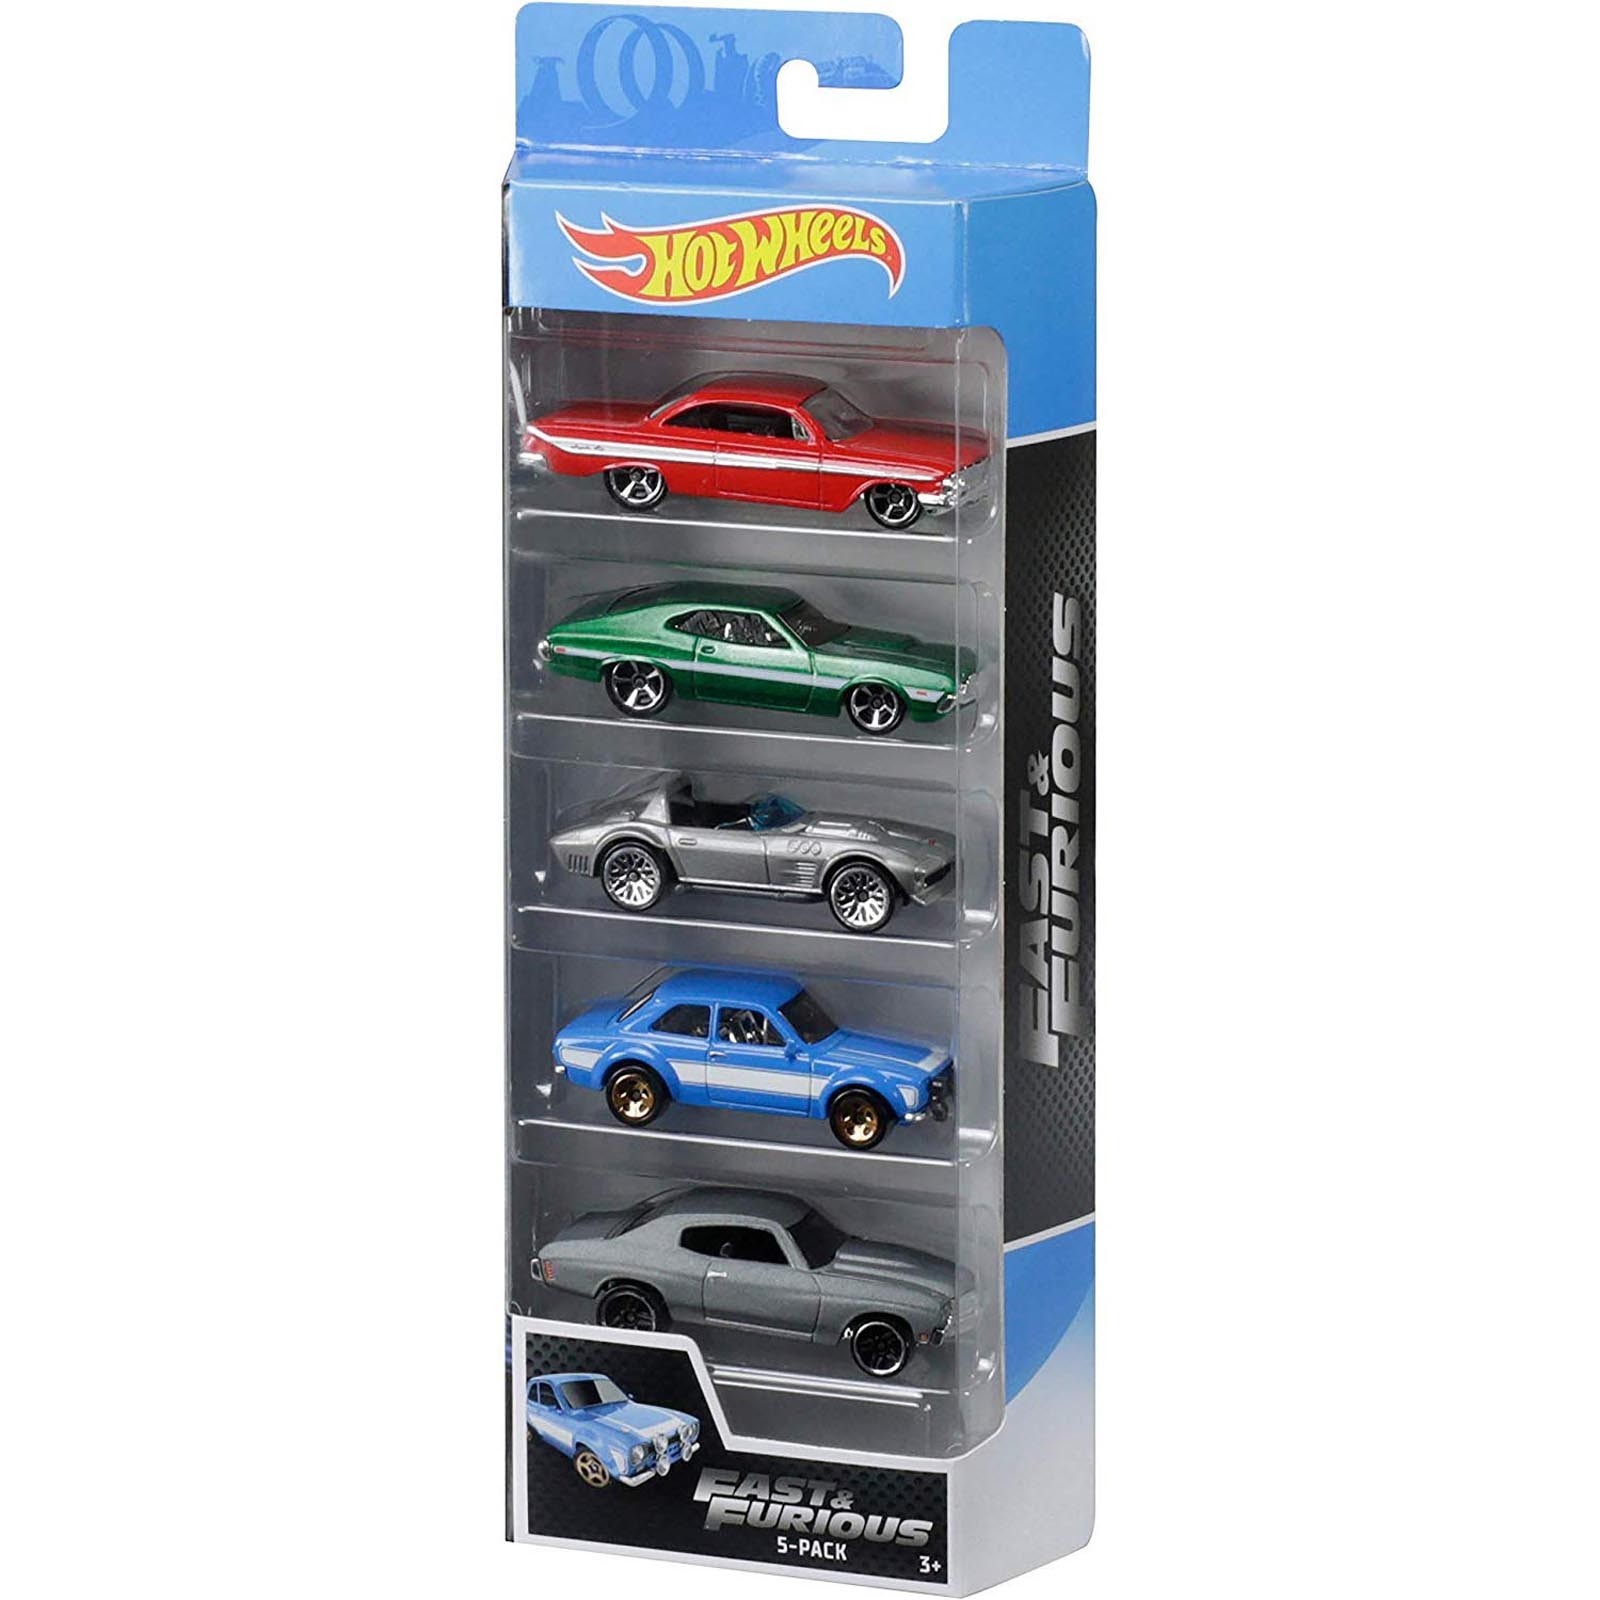 Hot Wheels Fast and Furious 5 Pack